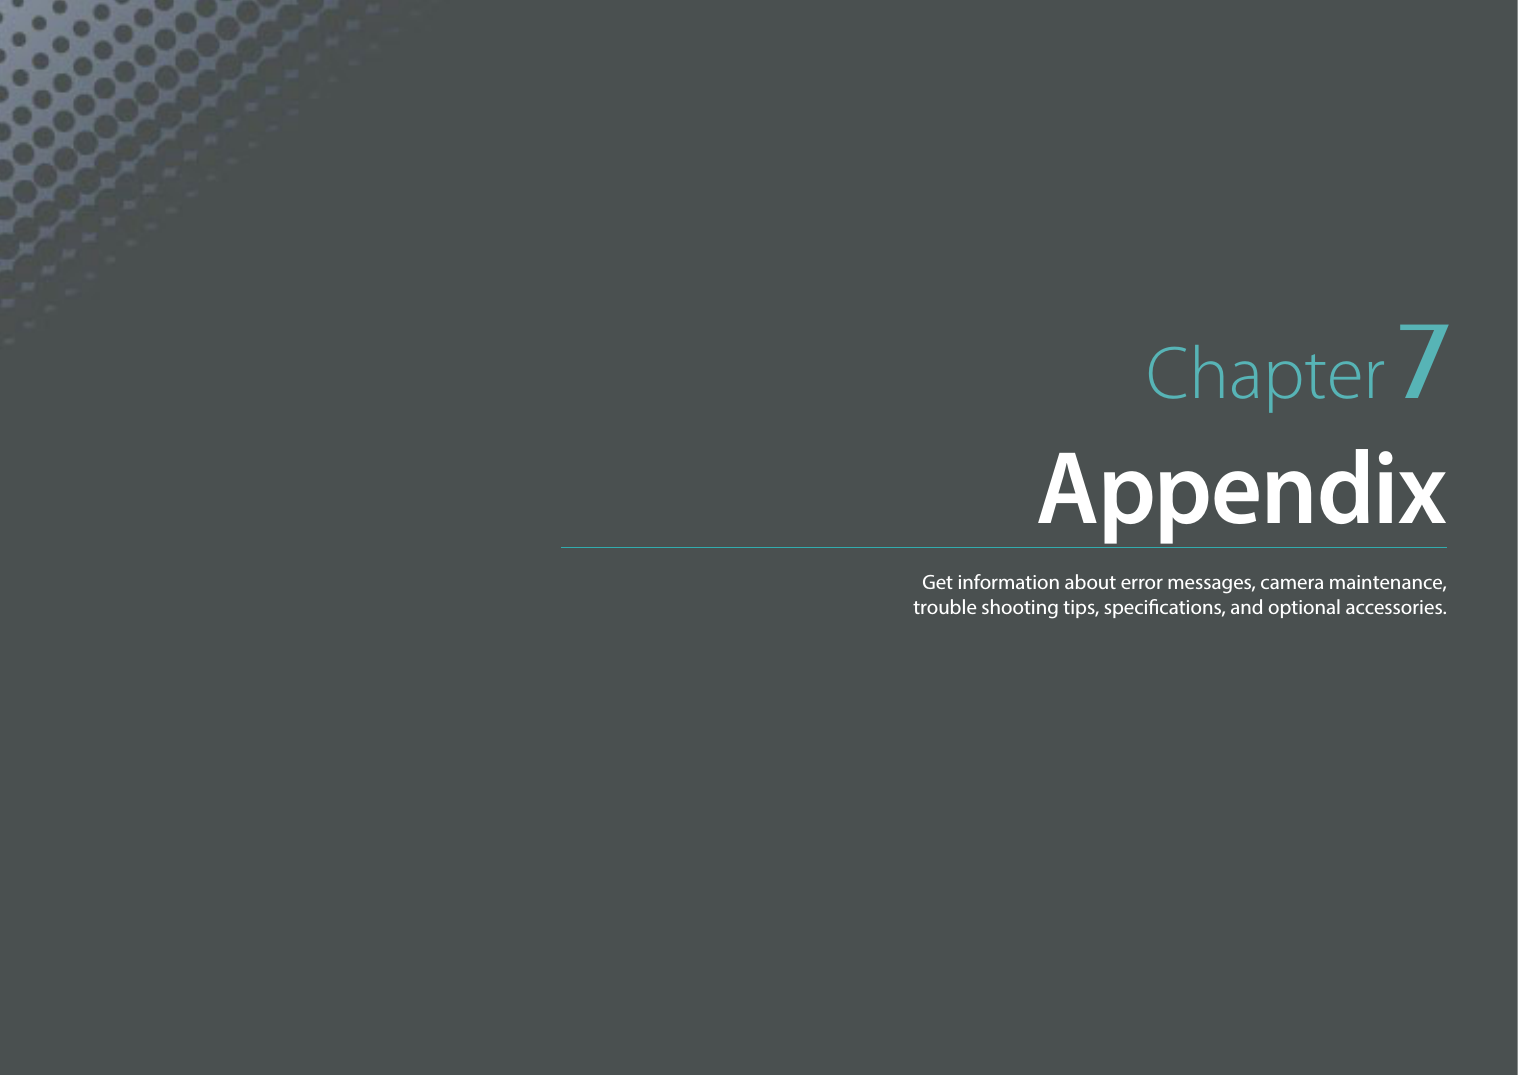 Chapter 7AppendixGet information about error messages, camera maintenance,  trouble shooting tips, specications, and optional accessories. 